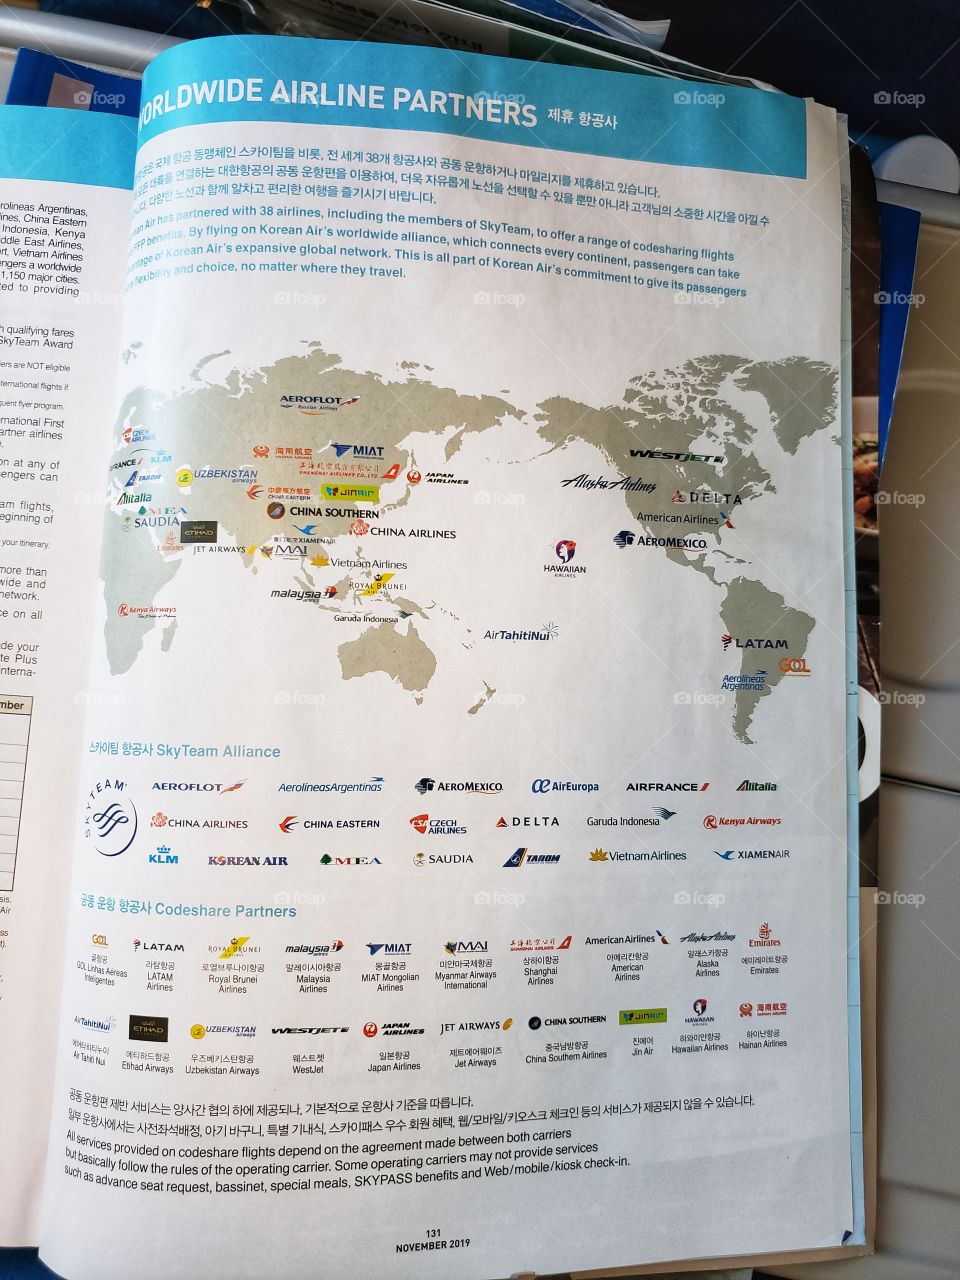 Korean Air onboard magazine with a page detailing all their worldwide partners and affiliates.